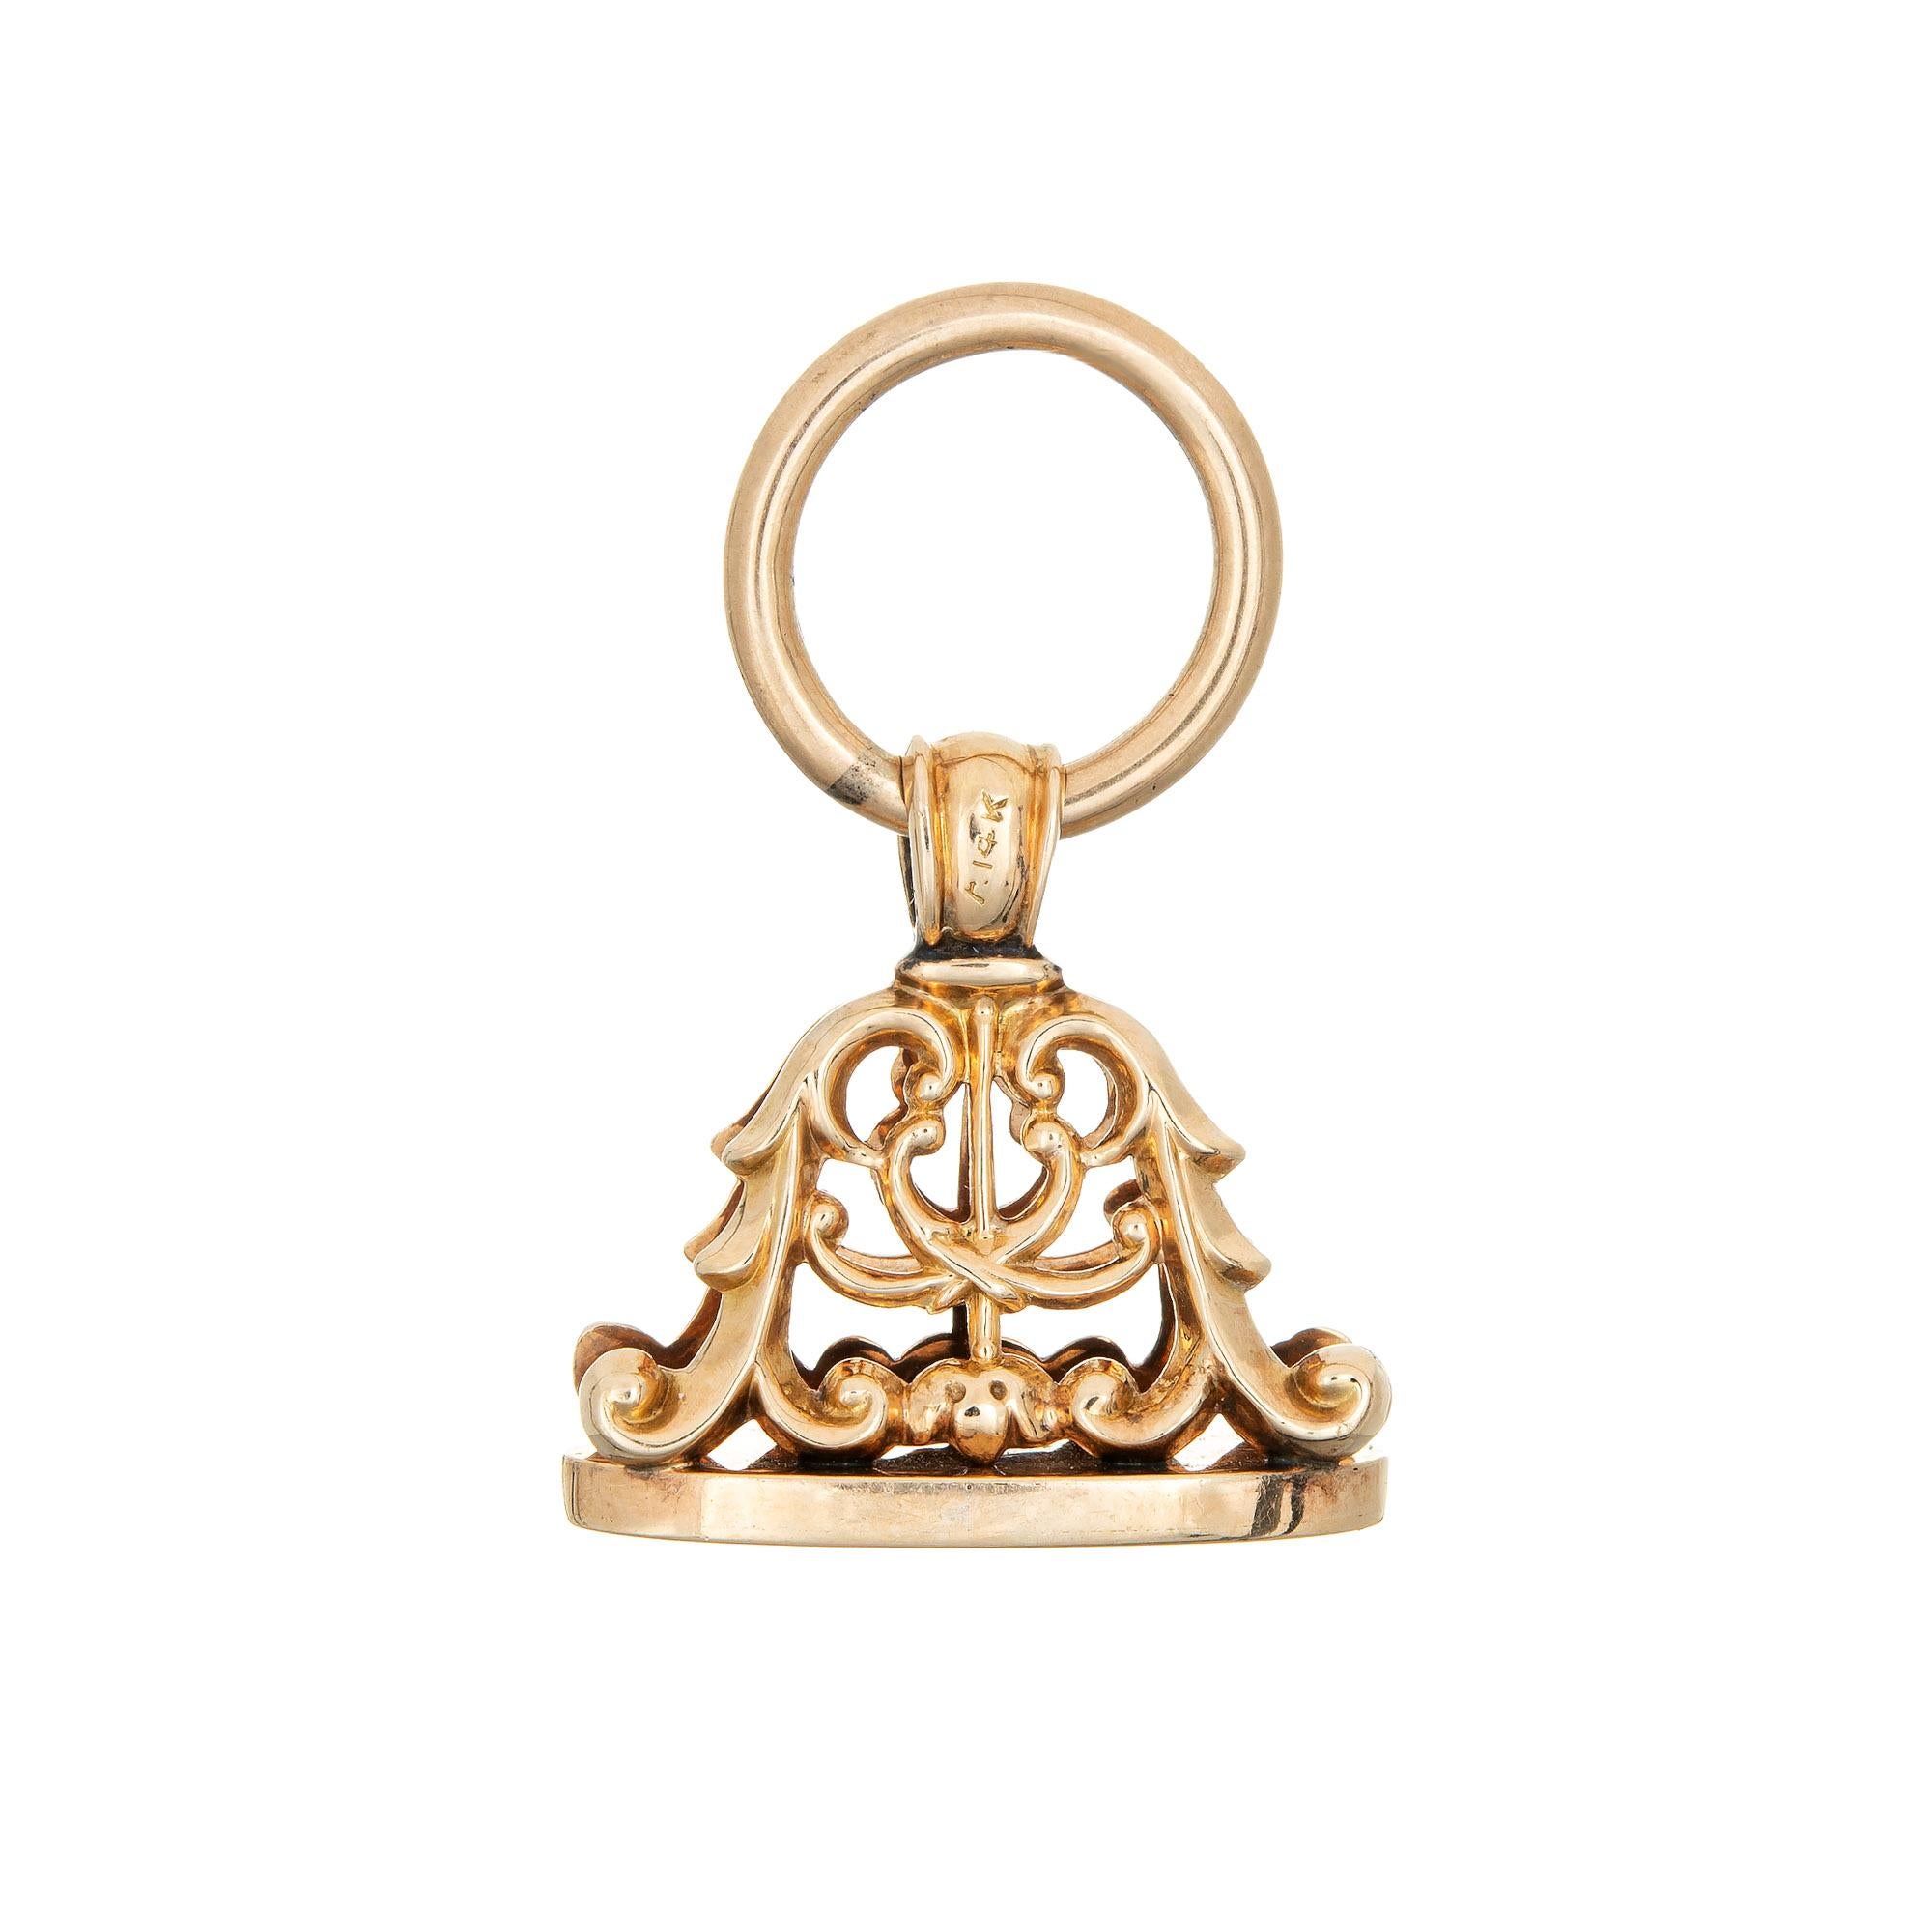 Lovely antique Victorian fob (circa 1880s to 1900s) crafted in 14 karat yellow gold. 

The beautifully detailed antique fob was originally worn by a gentleman with a pocket watch, a stylish addition to any outfit. Today watch fobs are great worn as